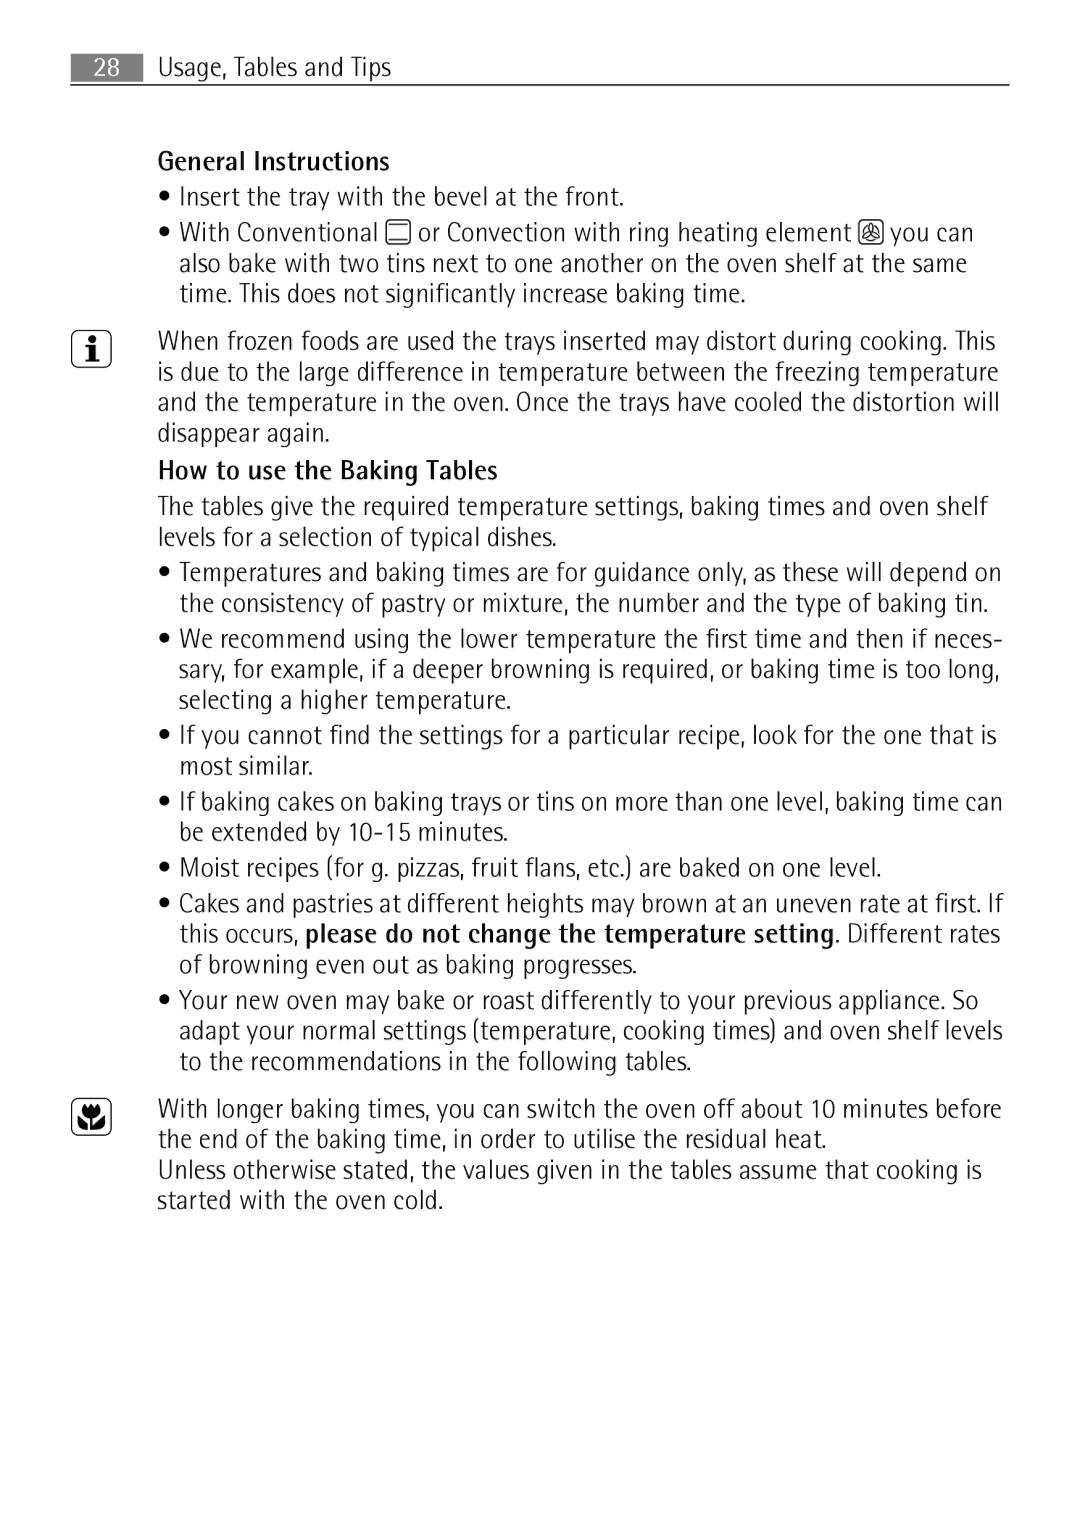 Electrolux B57415B, B57415A user manual General Instructions, How to use the Baking Tables 